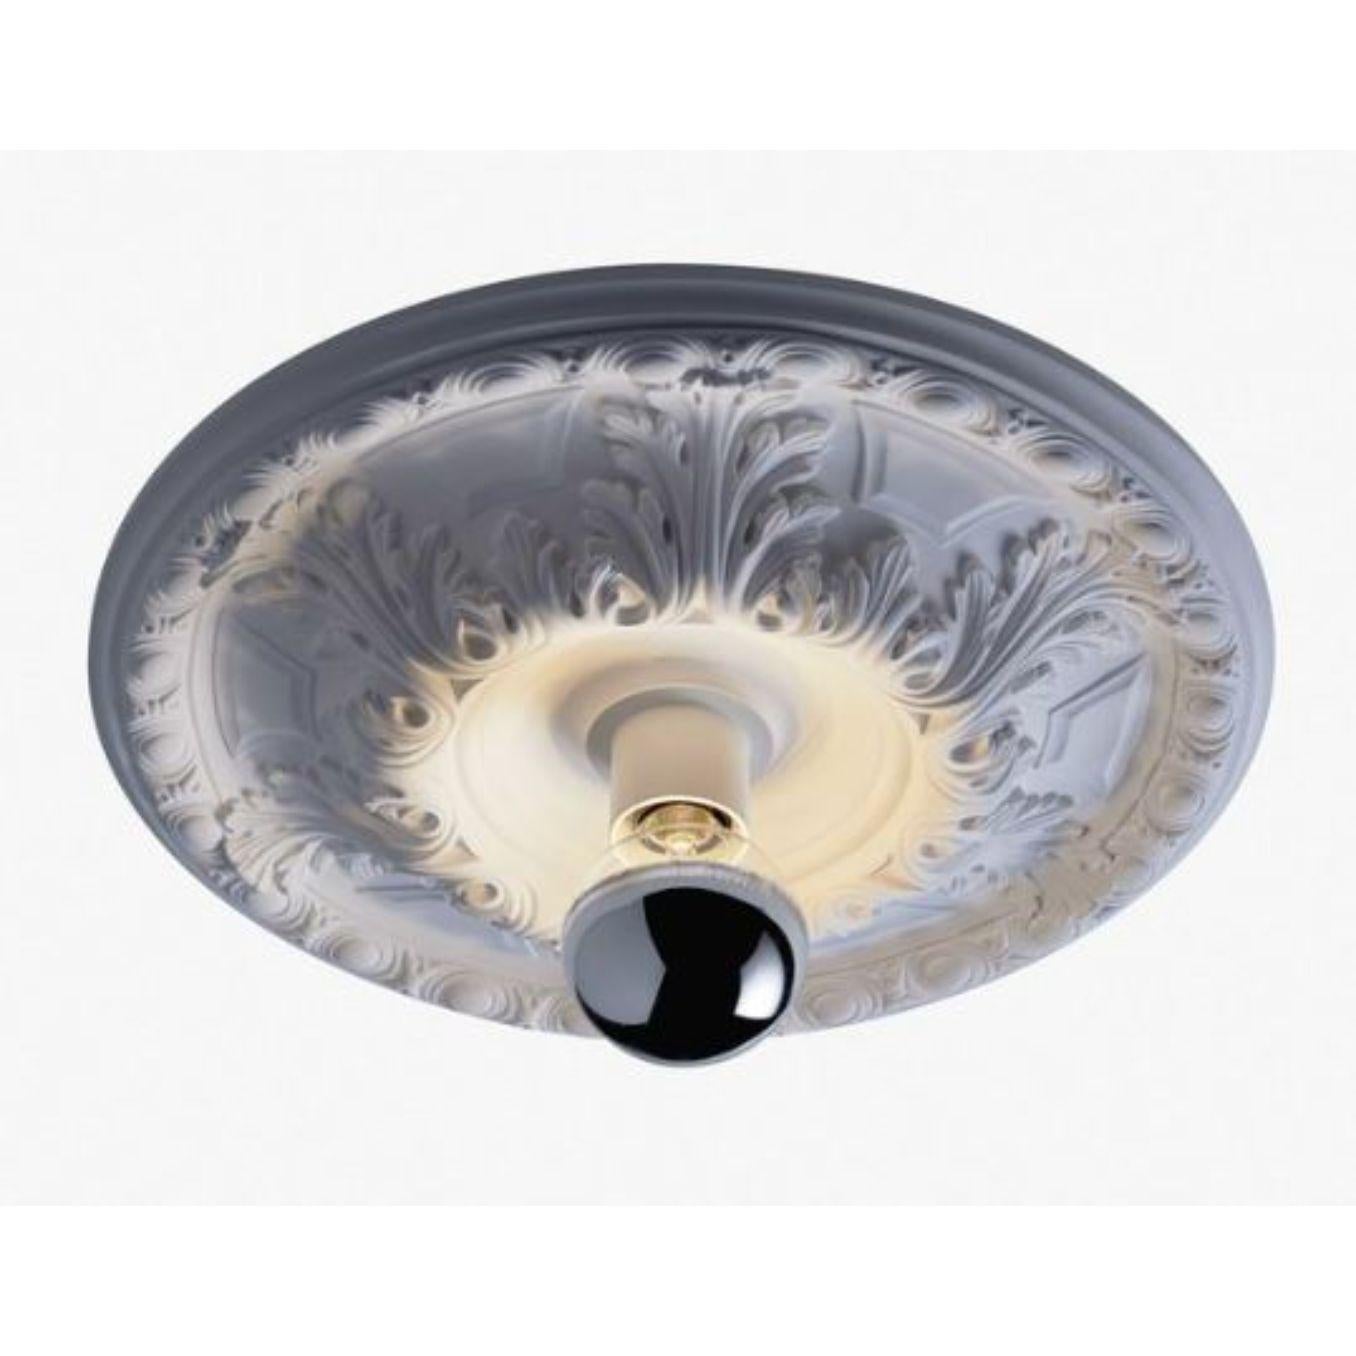 Small Solferino ceiling light by RADAR
Design: Bastien Taillard
Materials: Metal, plaster of Paris, fiberglass.
Dimensions: W 49.5 x D 49.5 x H 15 cm
Also available with a double layer of mat white paint or in raw plaster ready to paint. Bulb